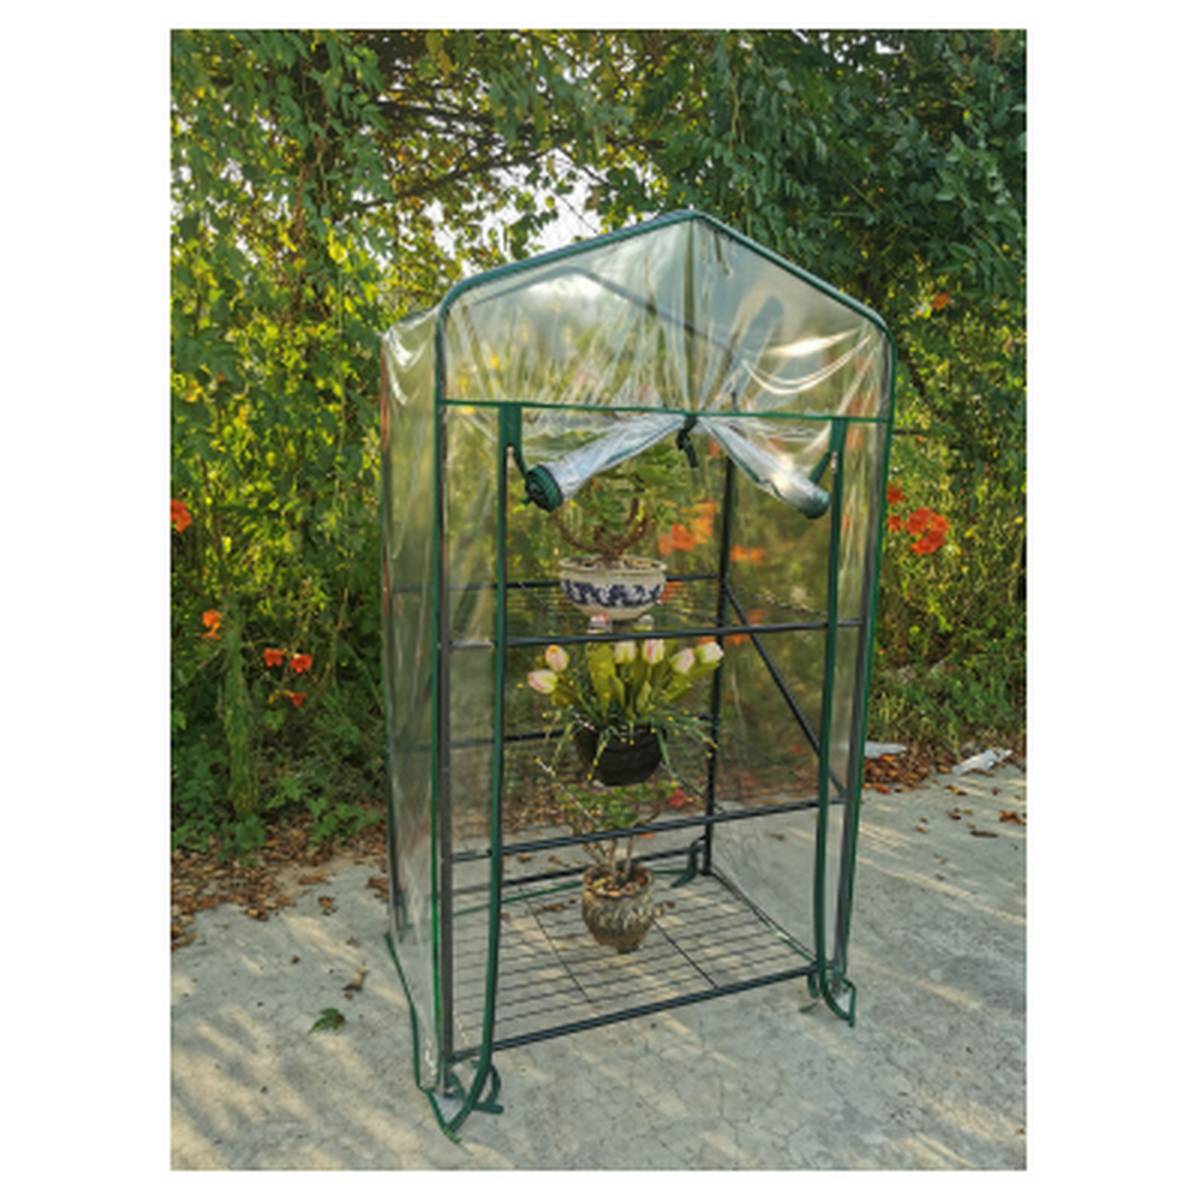 GREENBLADE GREEN BLADE 3 TIER COLD FRAME (MINI GREENHOUSE) BB-GH300